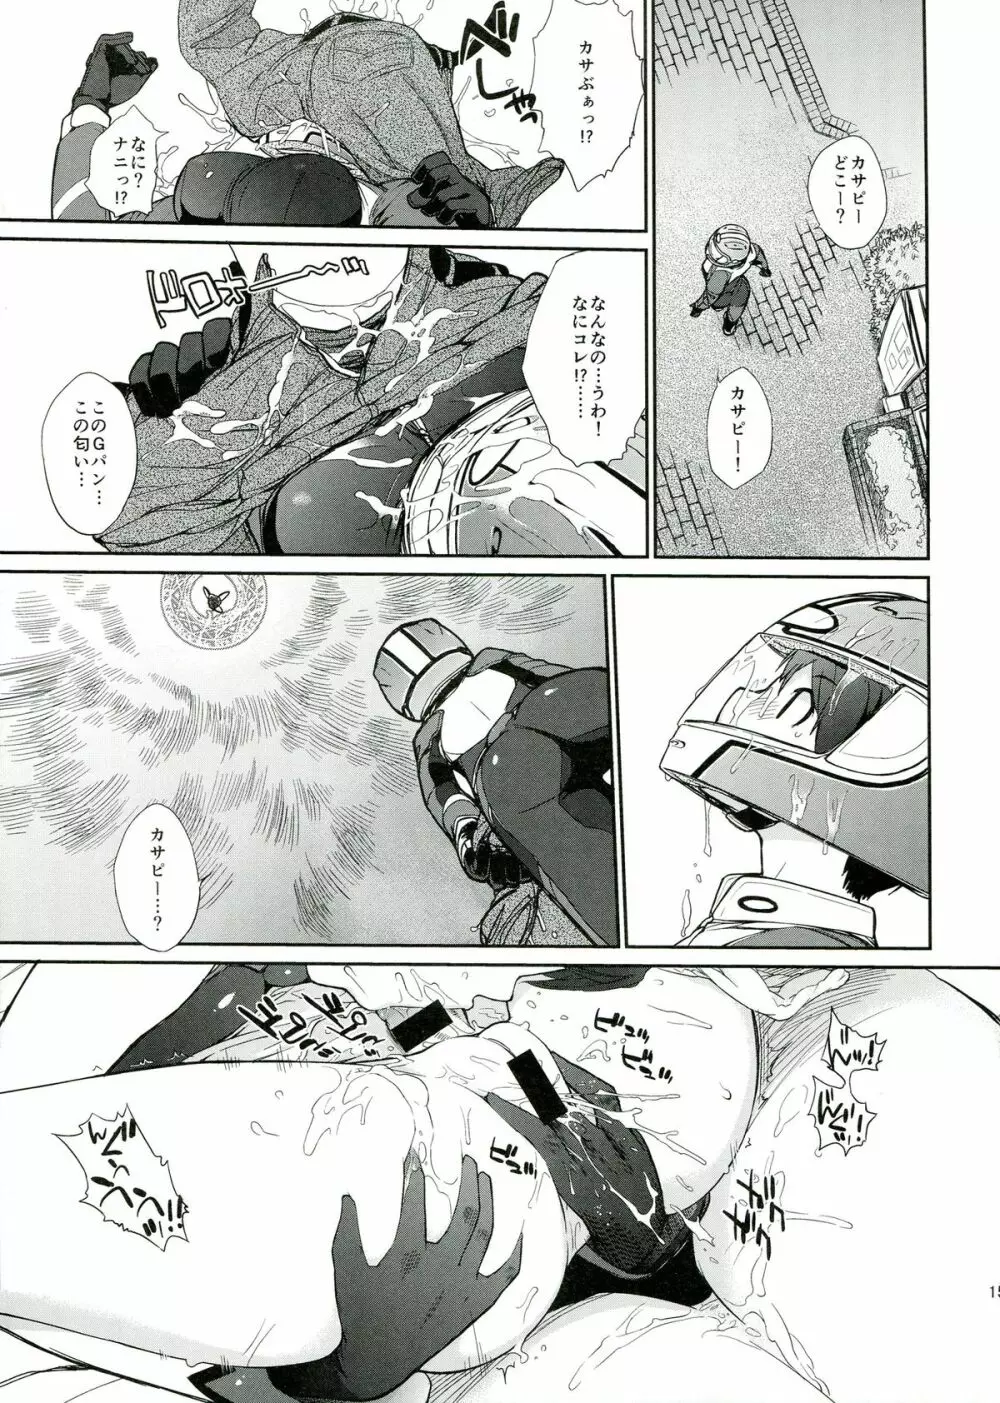 3ANGELS SHORT Full Blossom #01b Linearis Page.15